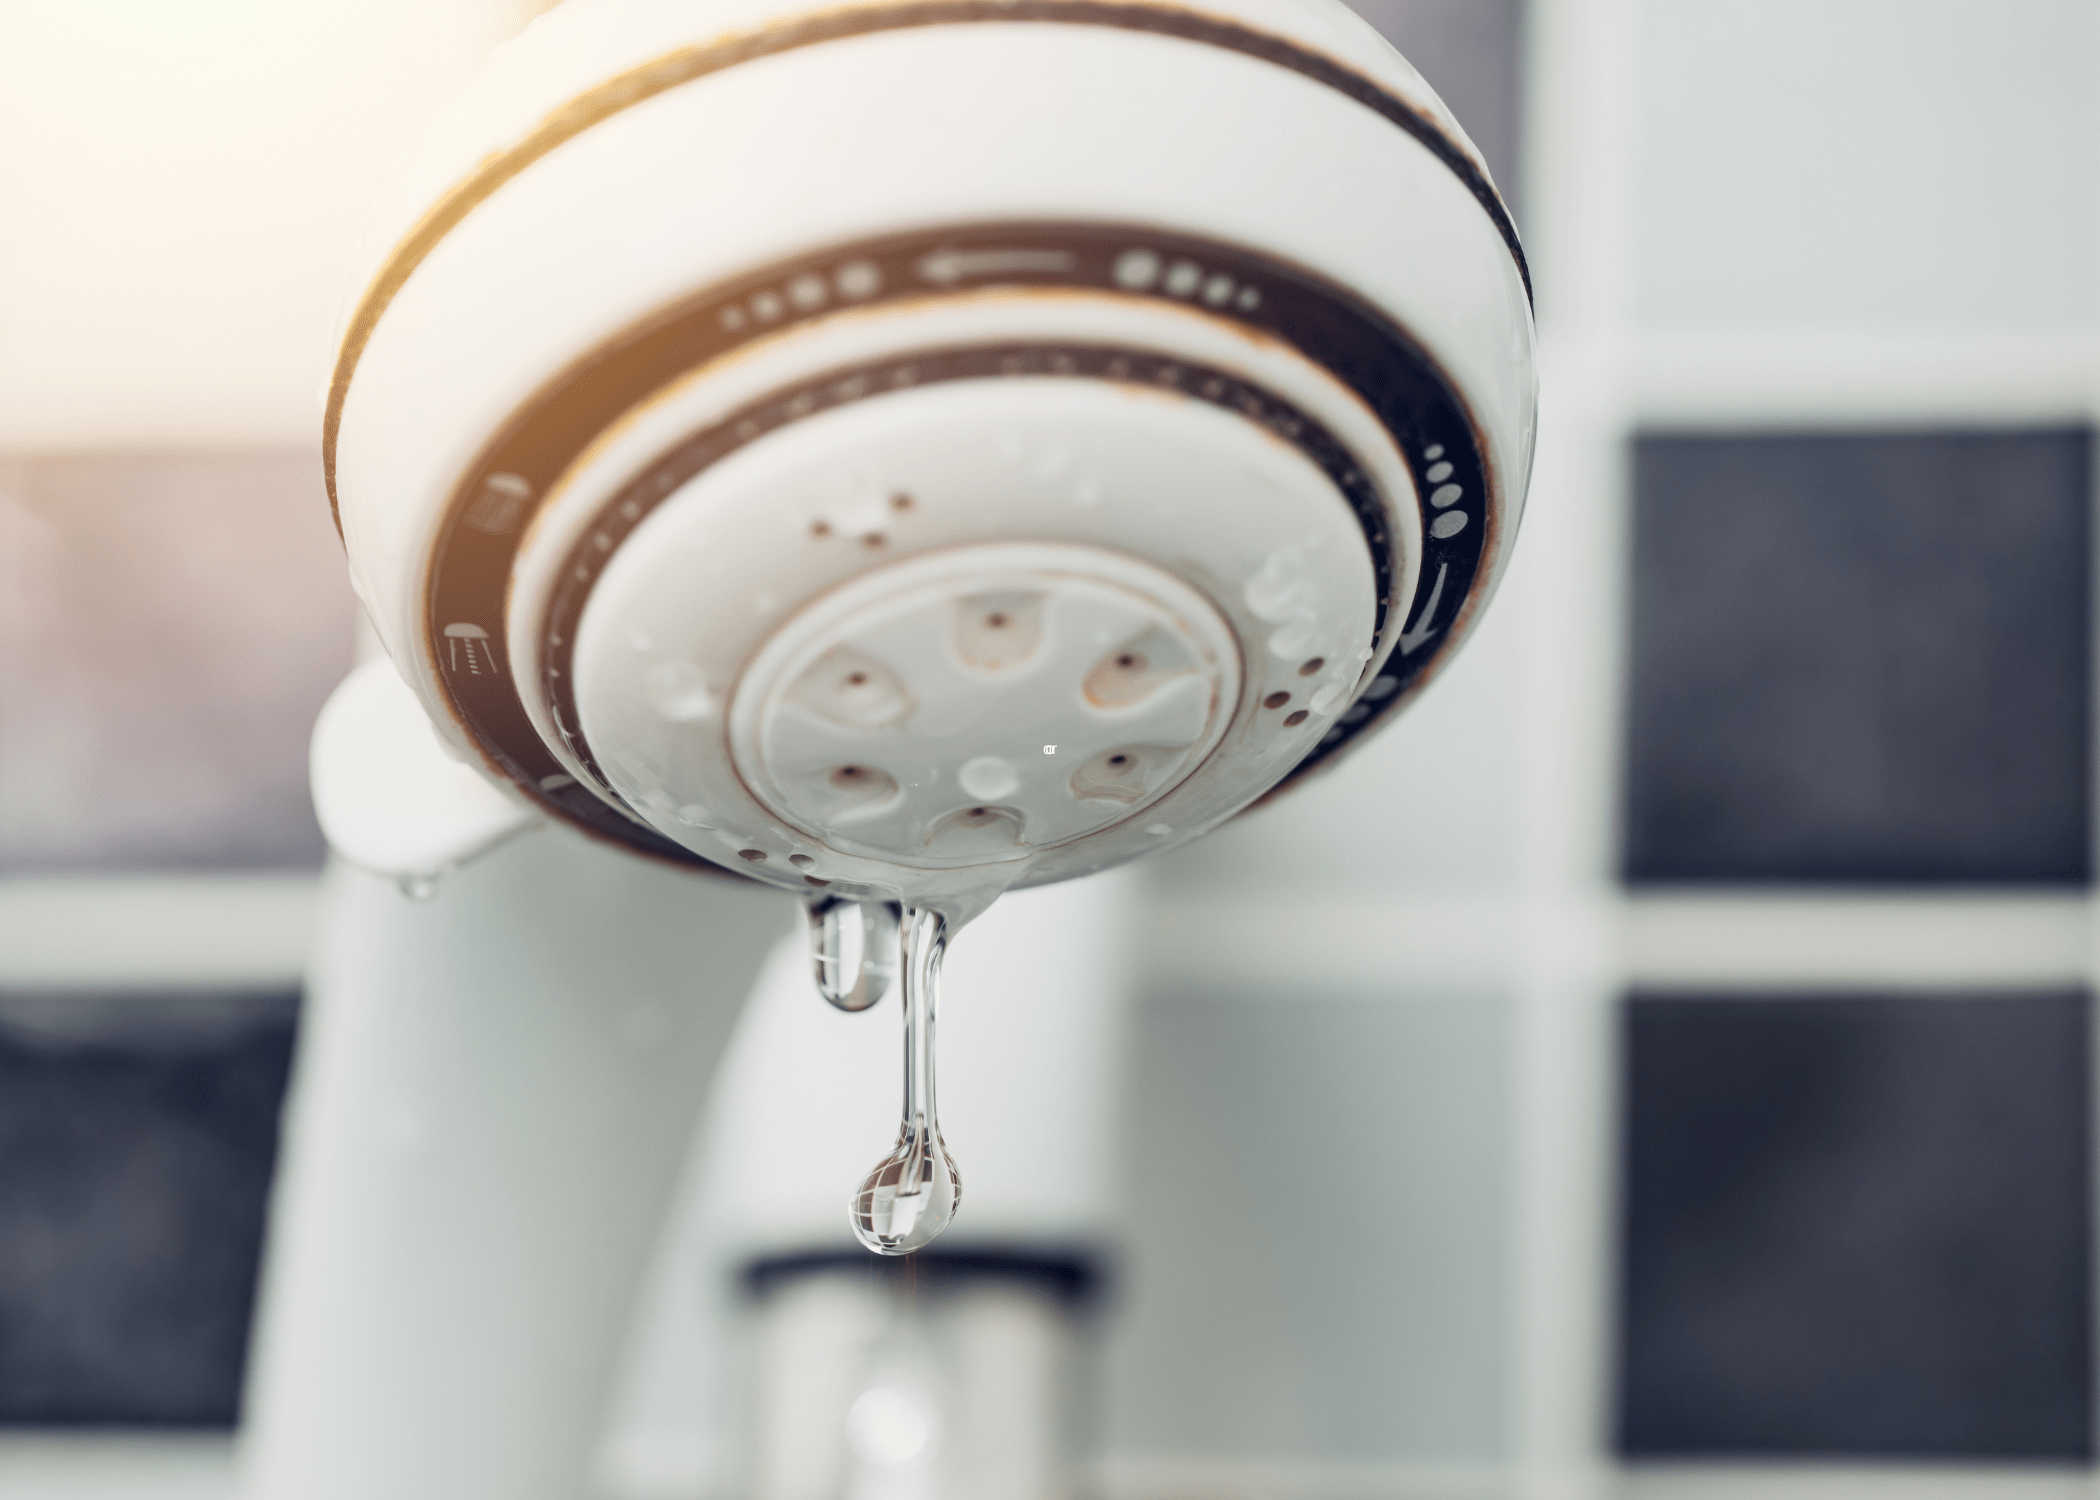 From Drip to Dry: How to Quickly Fix a Leaky Shower Faucet